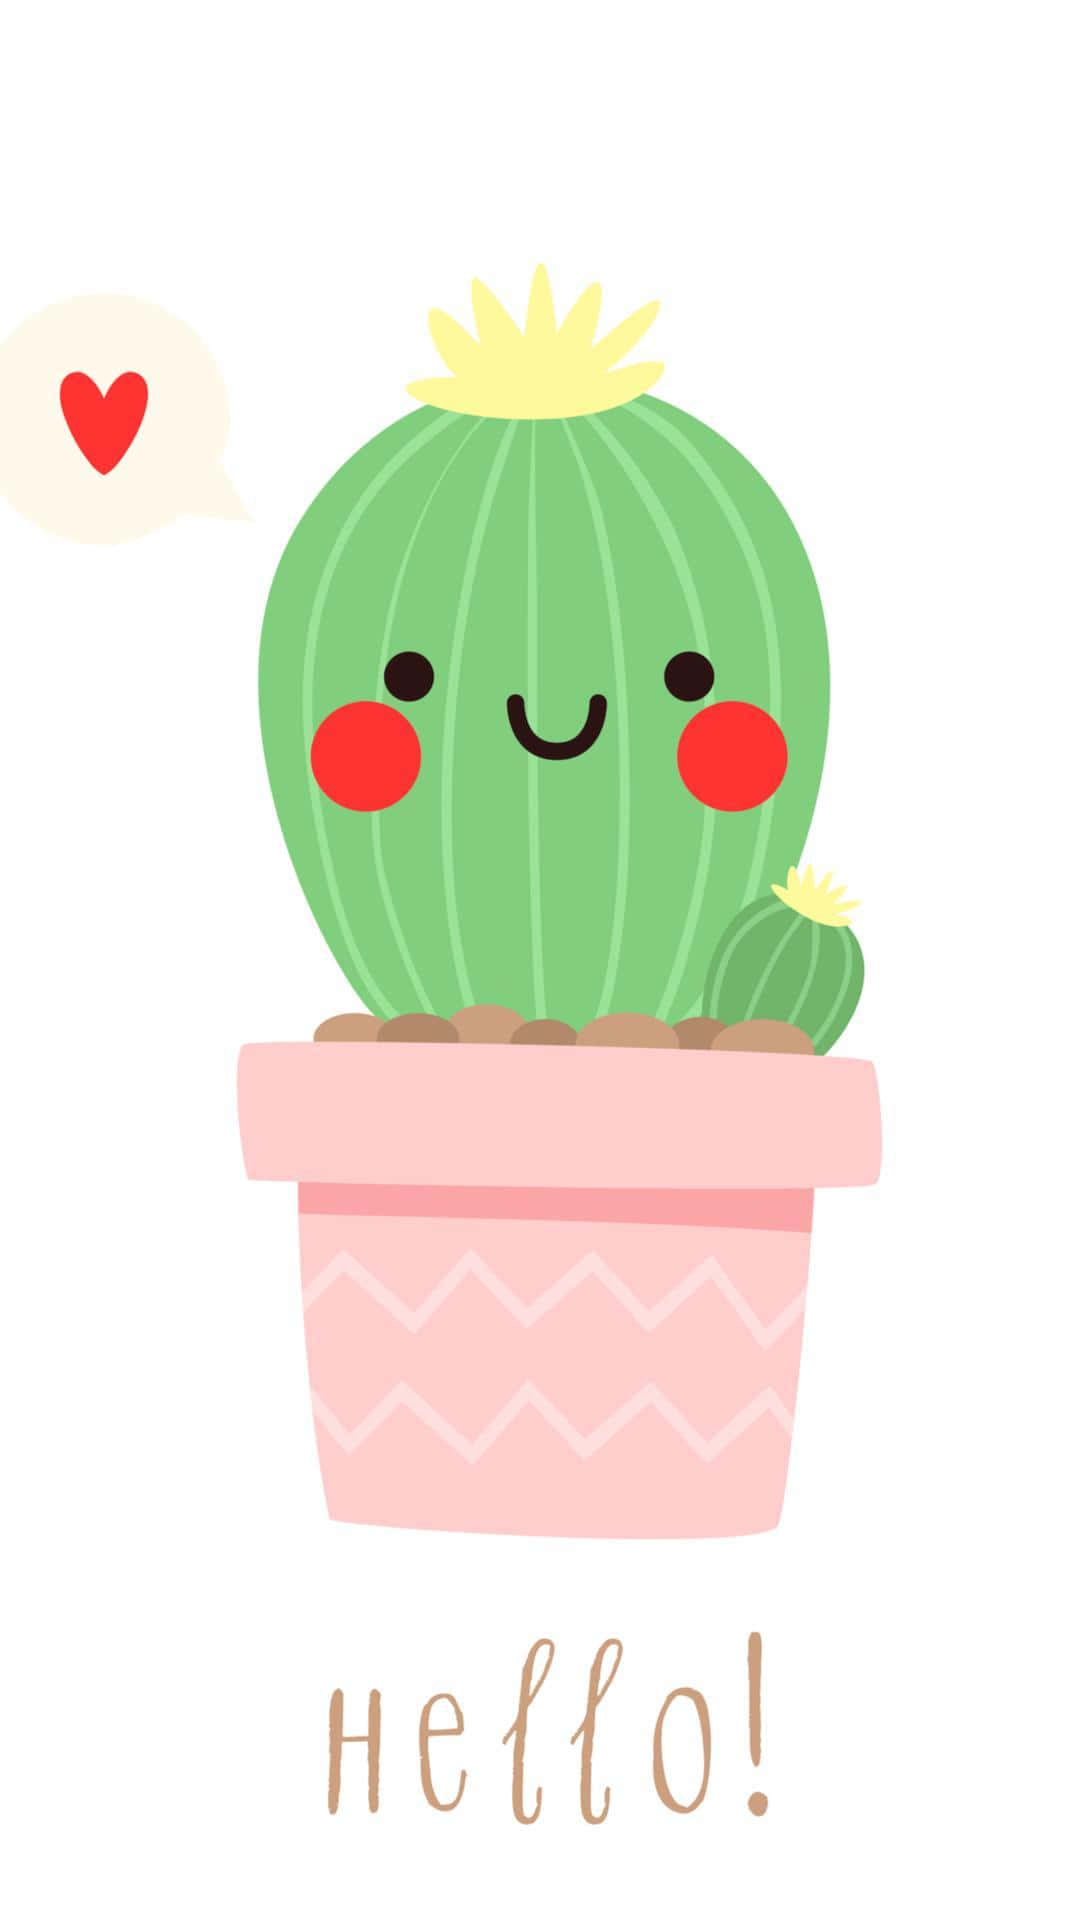 A Cute Cactus With The Words Hello On It Wallpaper